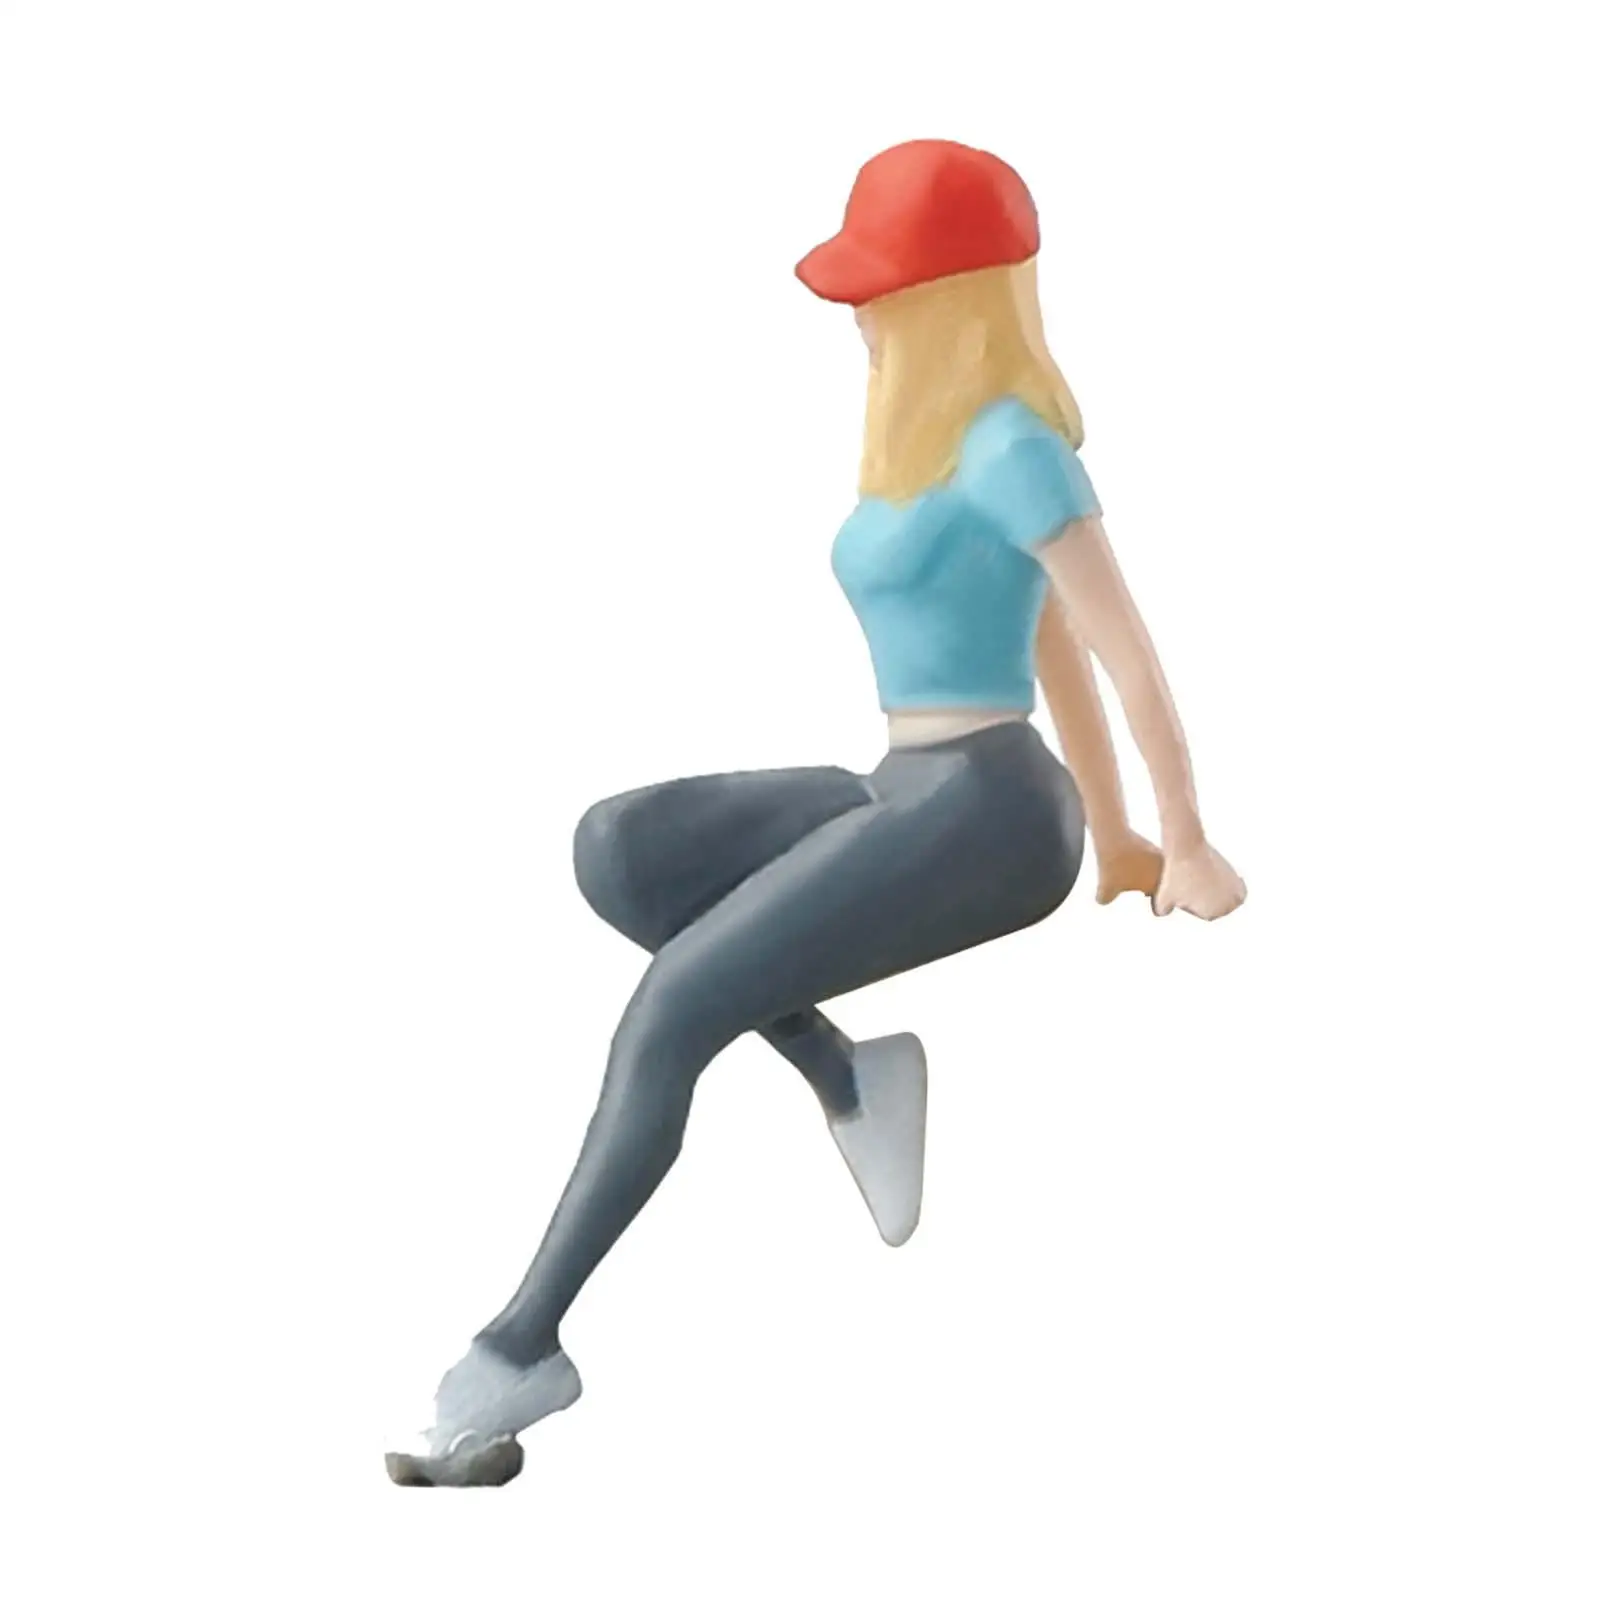 1/64 Girl Figures Character Model Standing People Figurines for DIY Scene Architectural Building Model Train Layout Sand Table